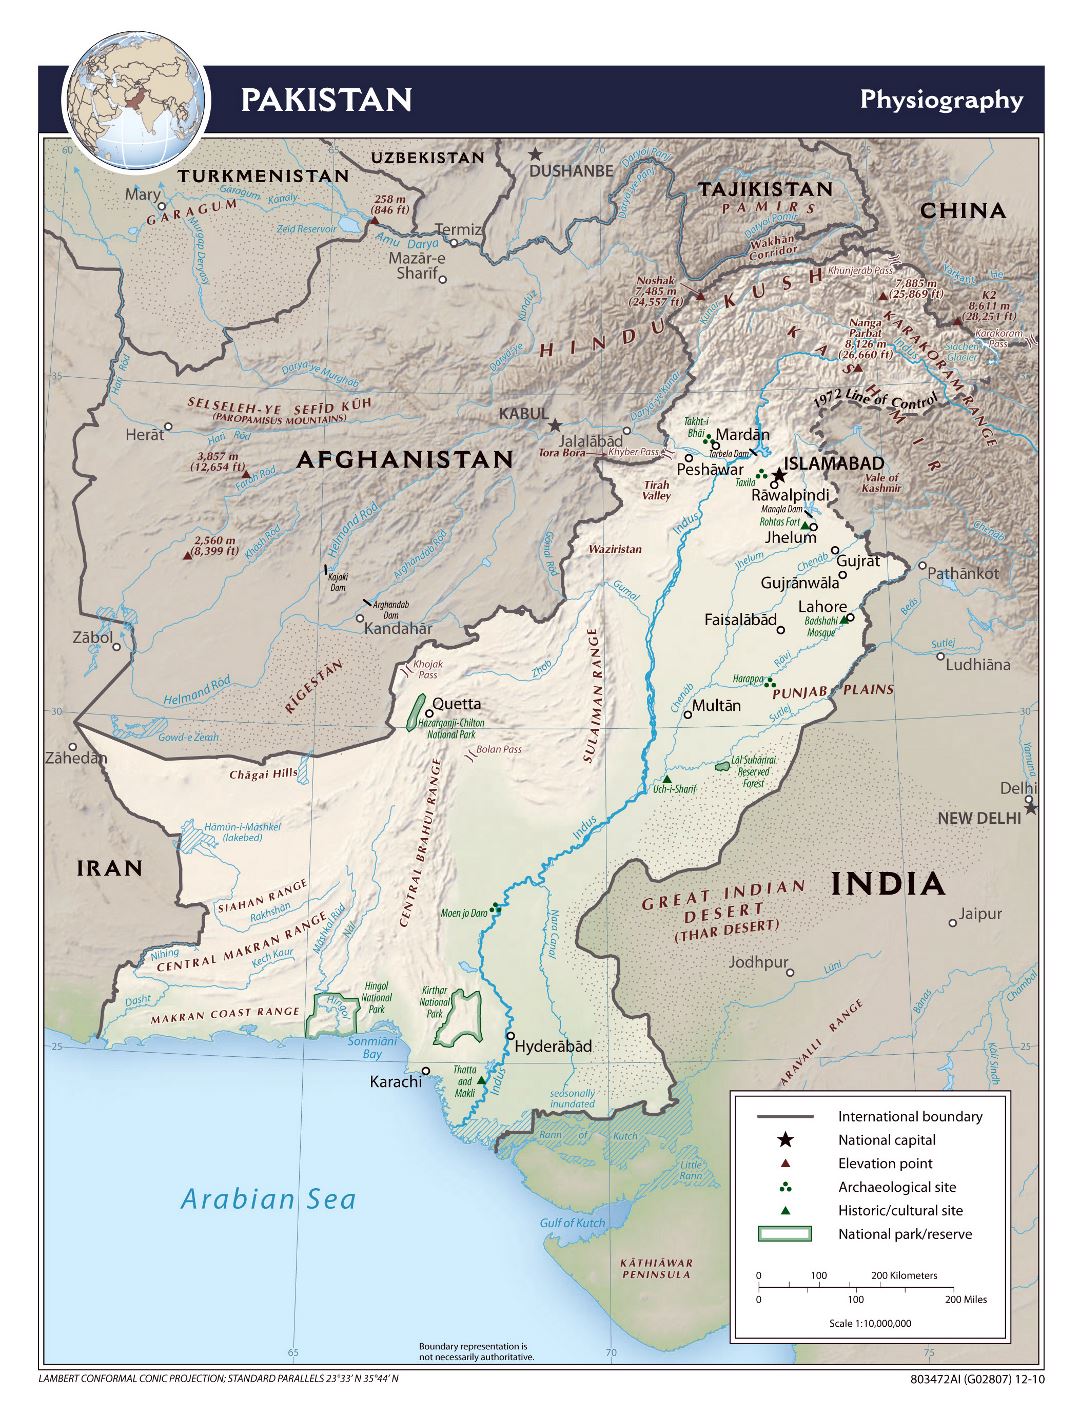 Large physiography map of Pakistan - 2010